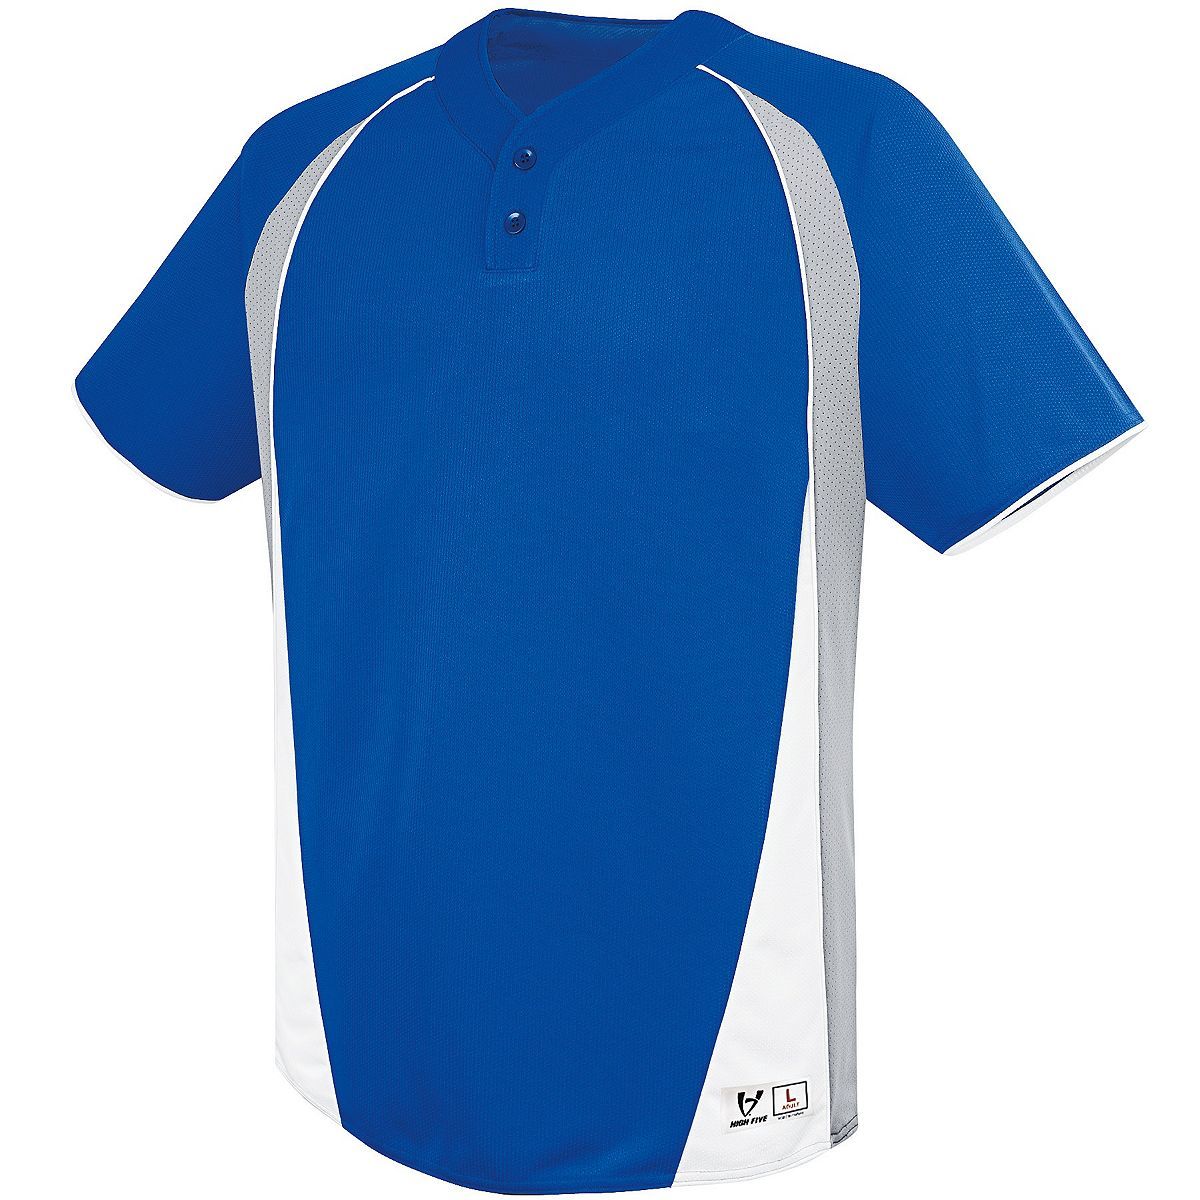 Augusta Sportswear Ace Two-Button Jersey in Royal/Silver Grey/White  -Part of the Adult, Adult-Jersey, Augusta-Products, Baseball, Shirts, All-Sports, All-Sports-1 product lines at KanaleyCreations.com